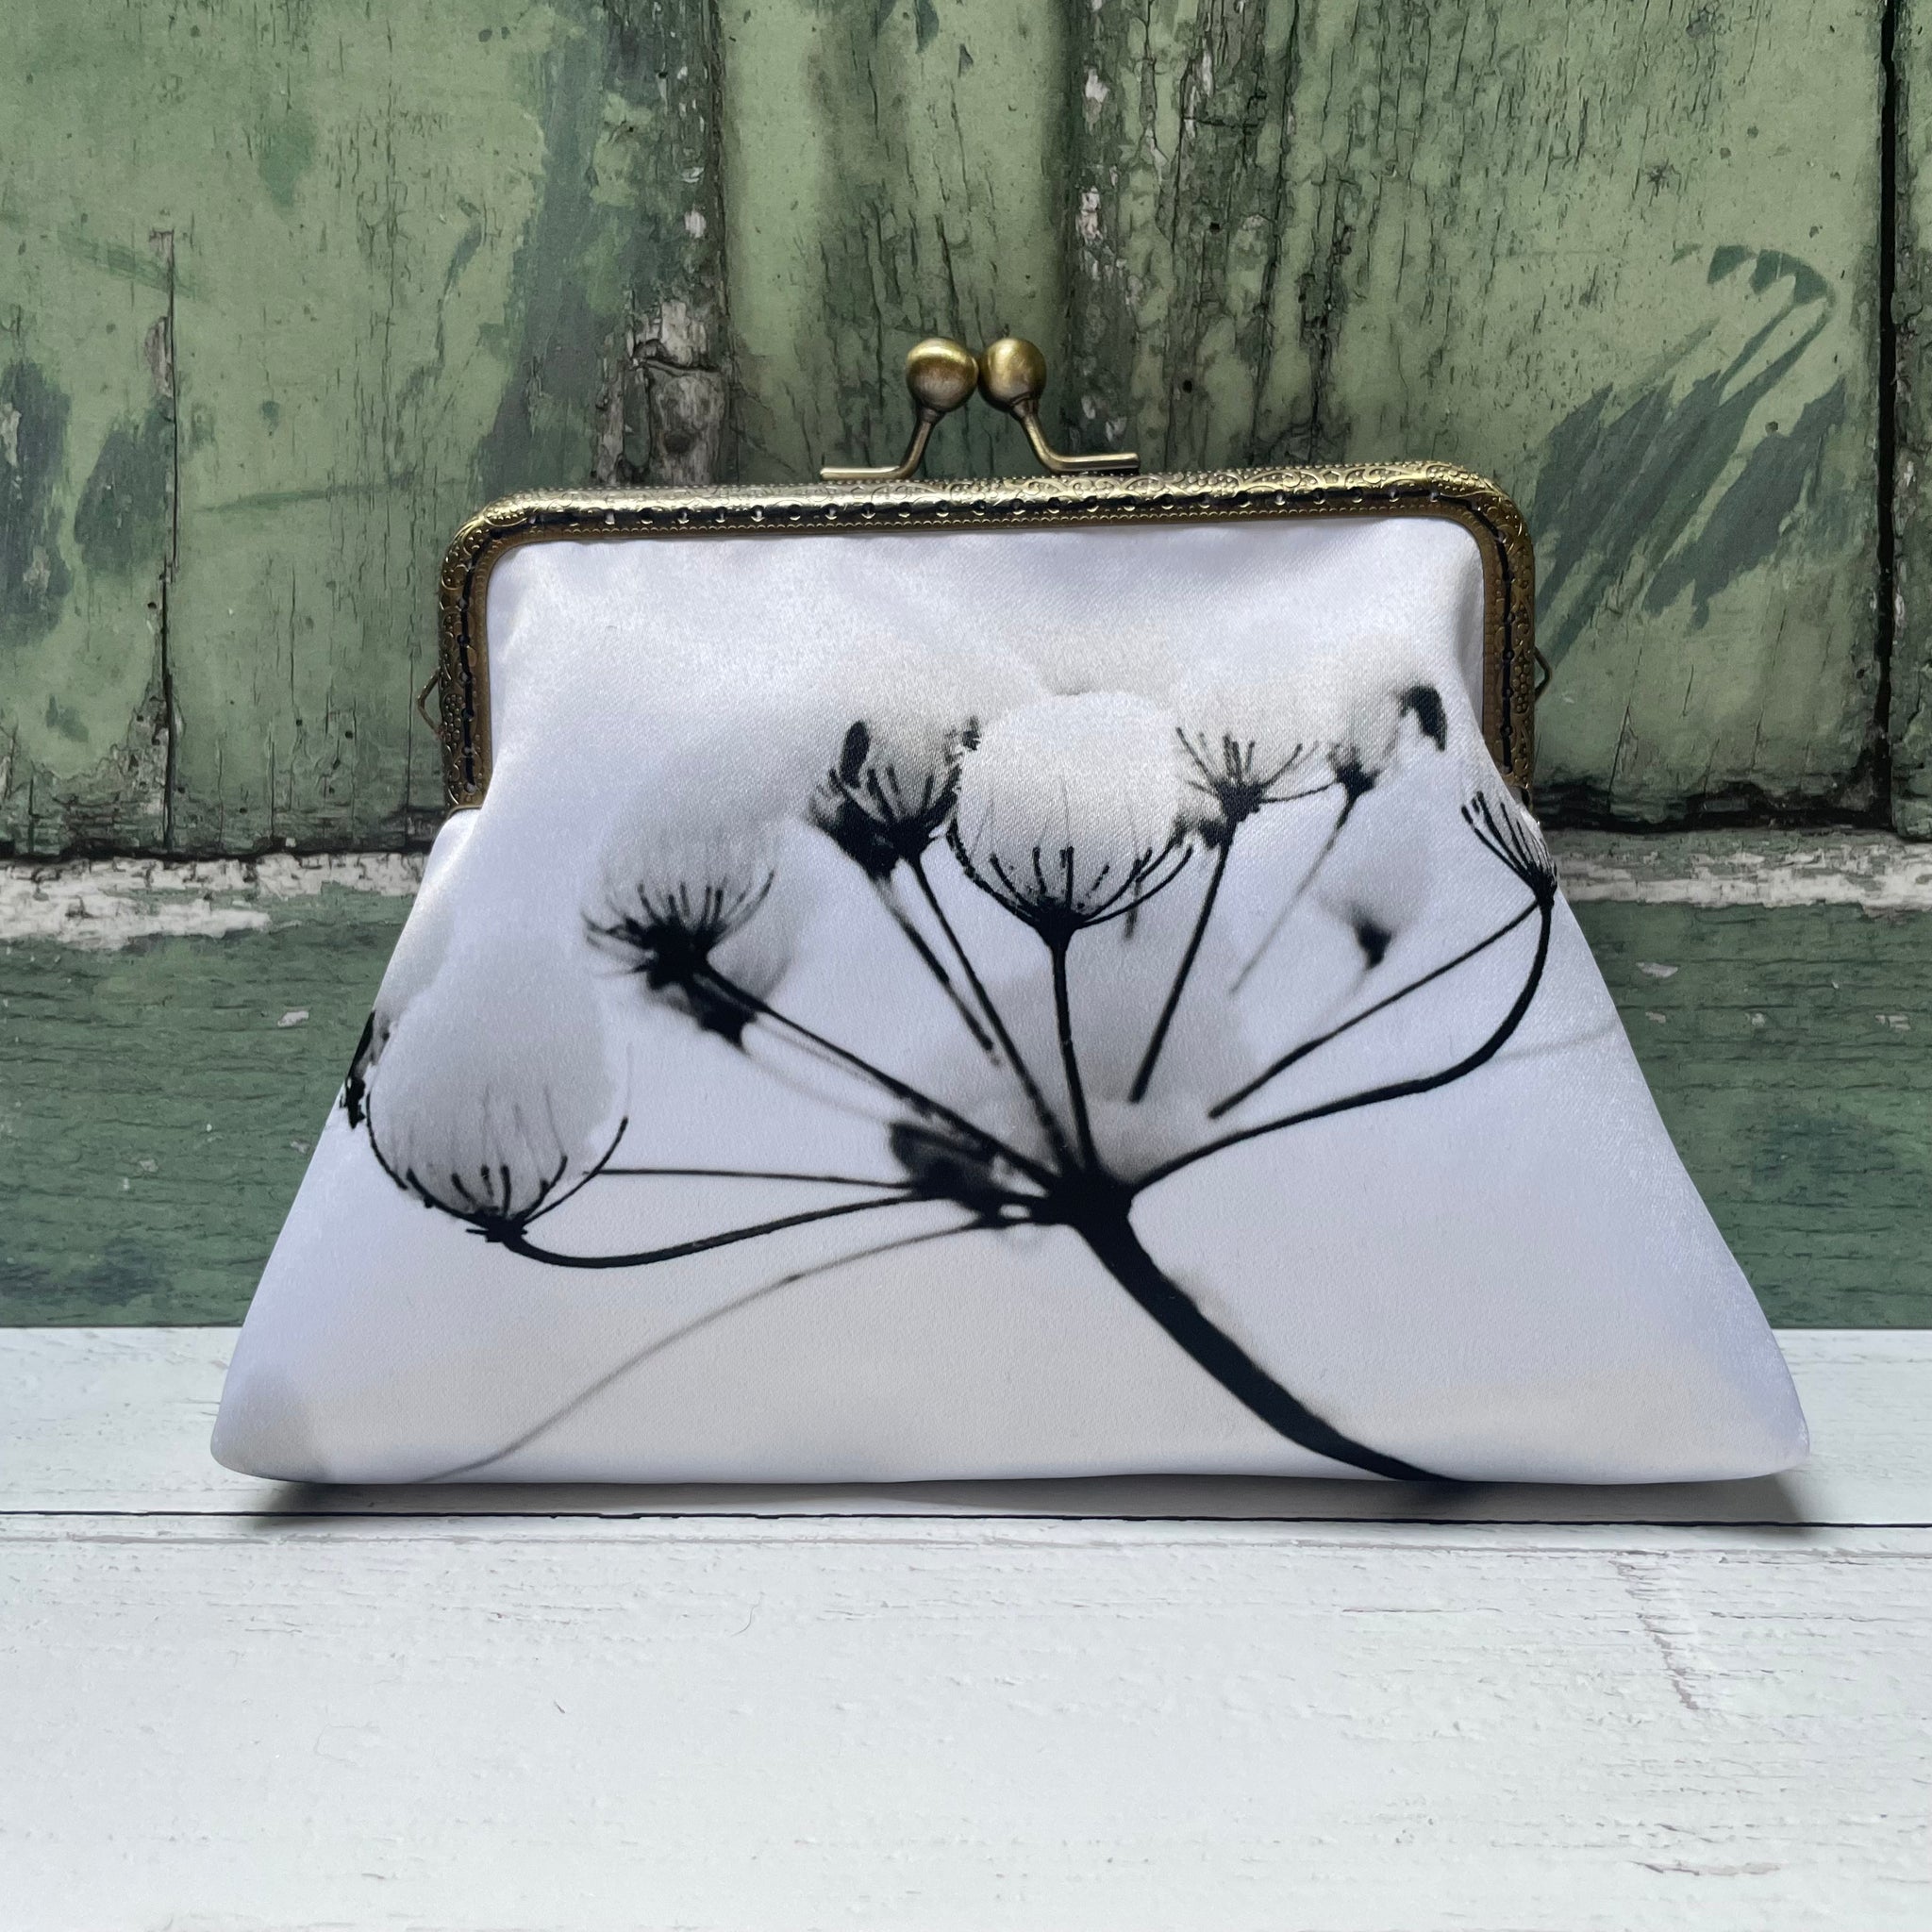 White Snowy Winter Flowers Floral Satin 5.5 Inch Bronze Clasp Purse Frame Clutch Bag